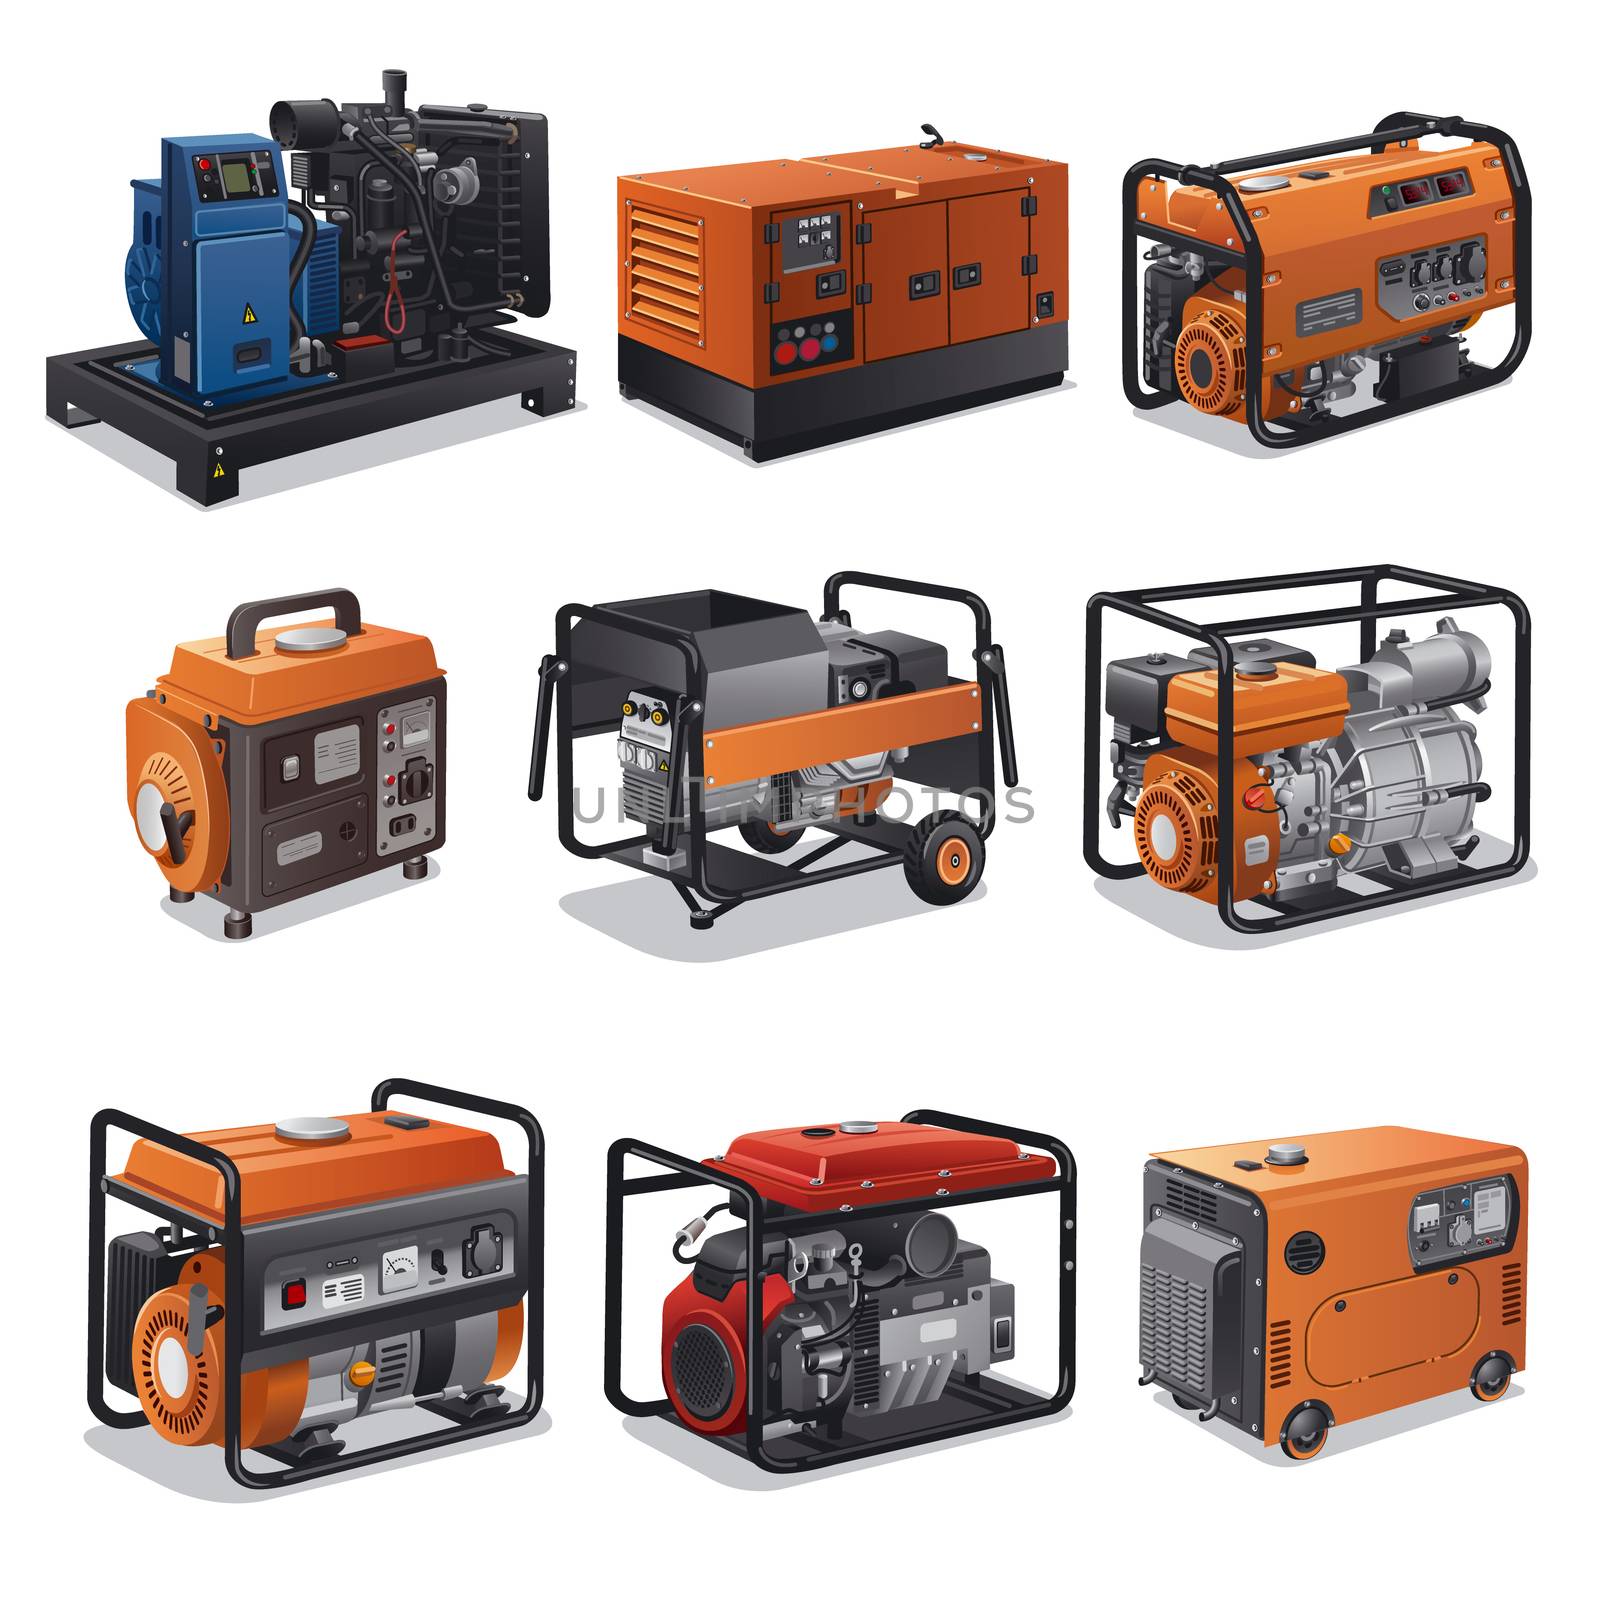 illustration of different type of industrial and small power generators